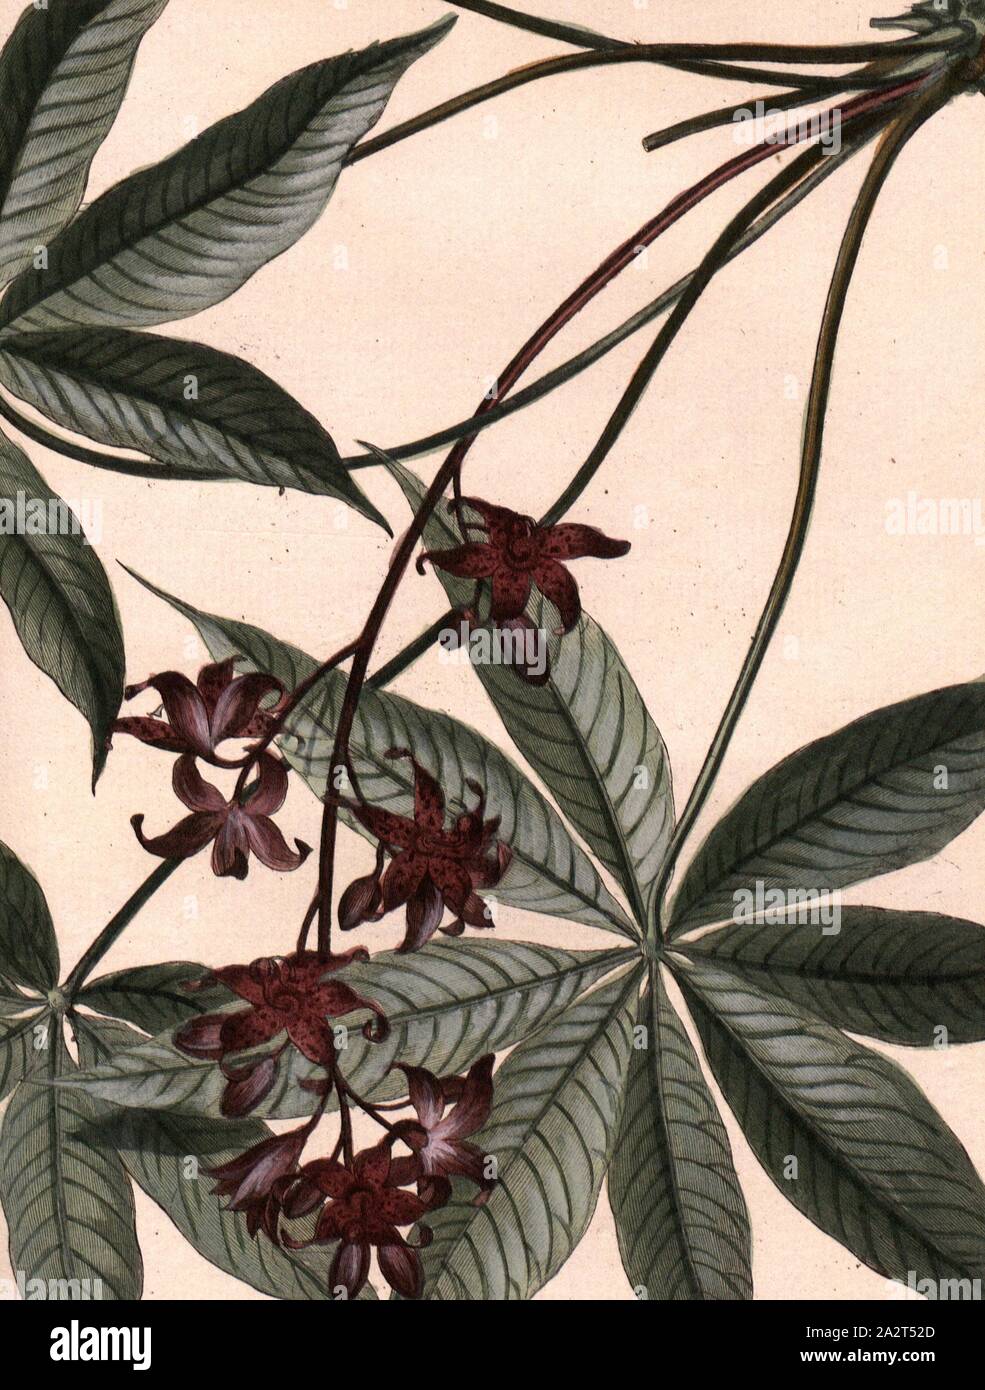 Cavalam with leaves, Leaves and flowers of a stink tree (Sterculia foetida), Signed: P. Sonnerat pinx, Milsan sculp, Pl. 132, after p. 234 (Vol. 2), Sonnerat, Pierre M. (pinx.); Milsan (sculp.), 1782, Sonnerat, Pierre Stock Photo